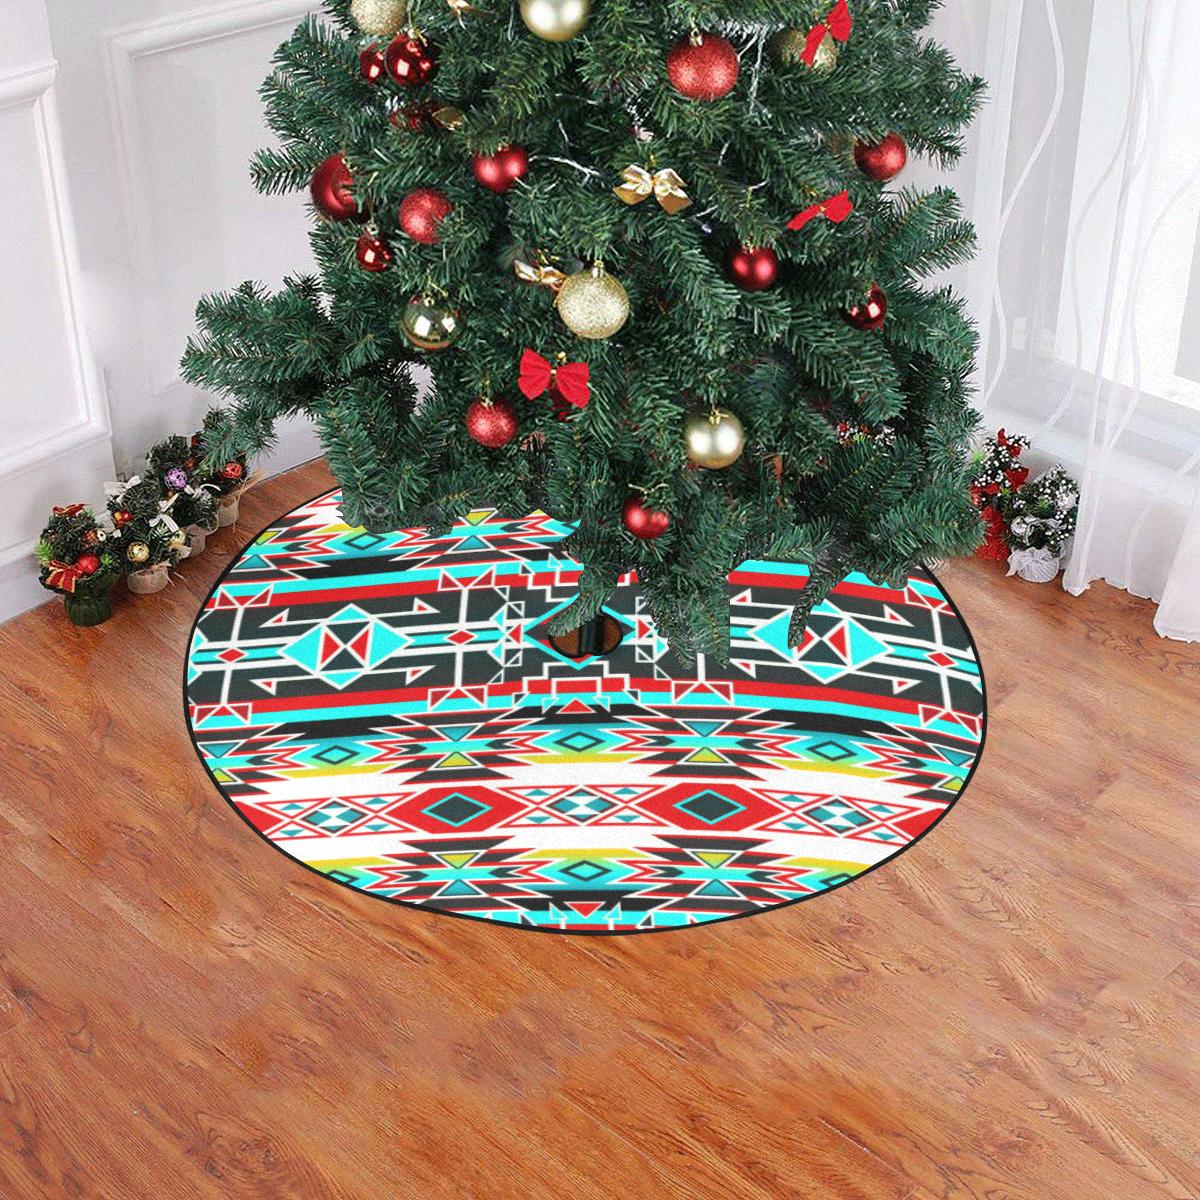 Force of Nature Windstorm Christmas Tree Skirt 47" x 47" Christmas Tree Skirt e-joyer 